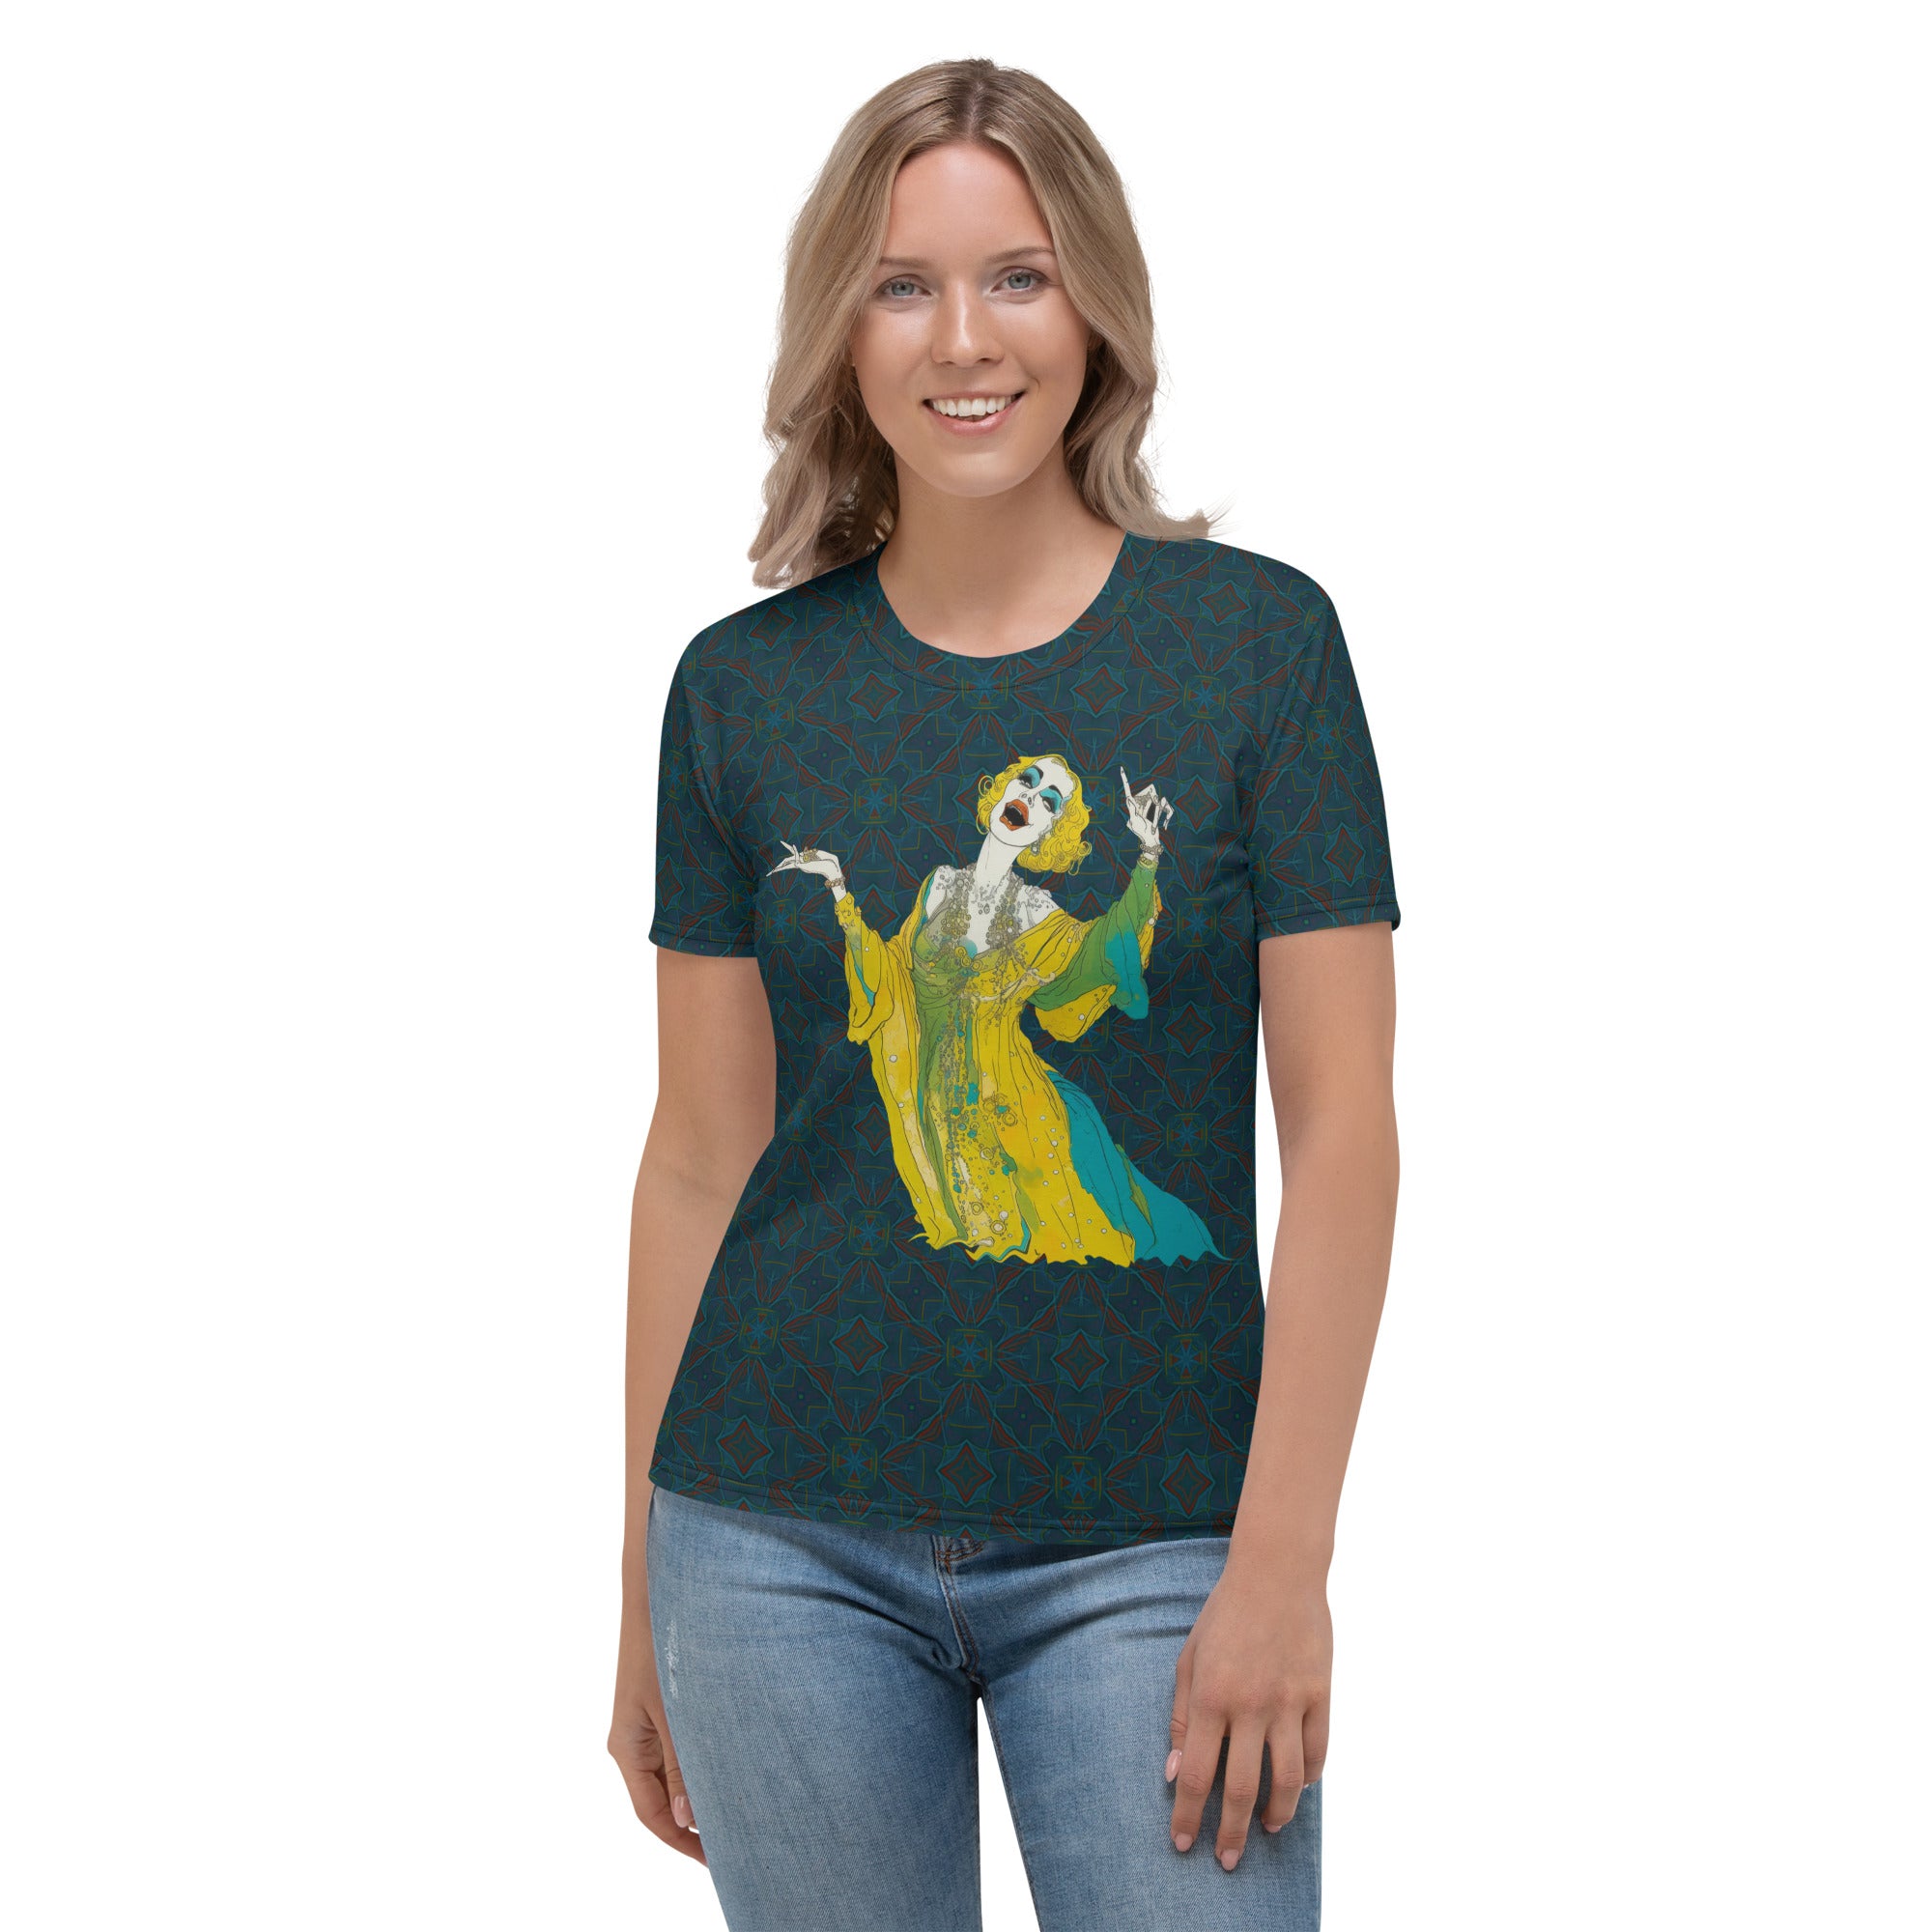 Mystic Meadow Women's Crew Neck T-Shirt on a clothing mannequin.